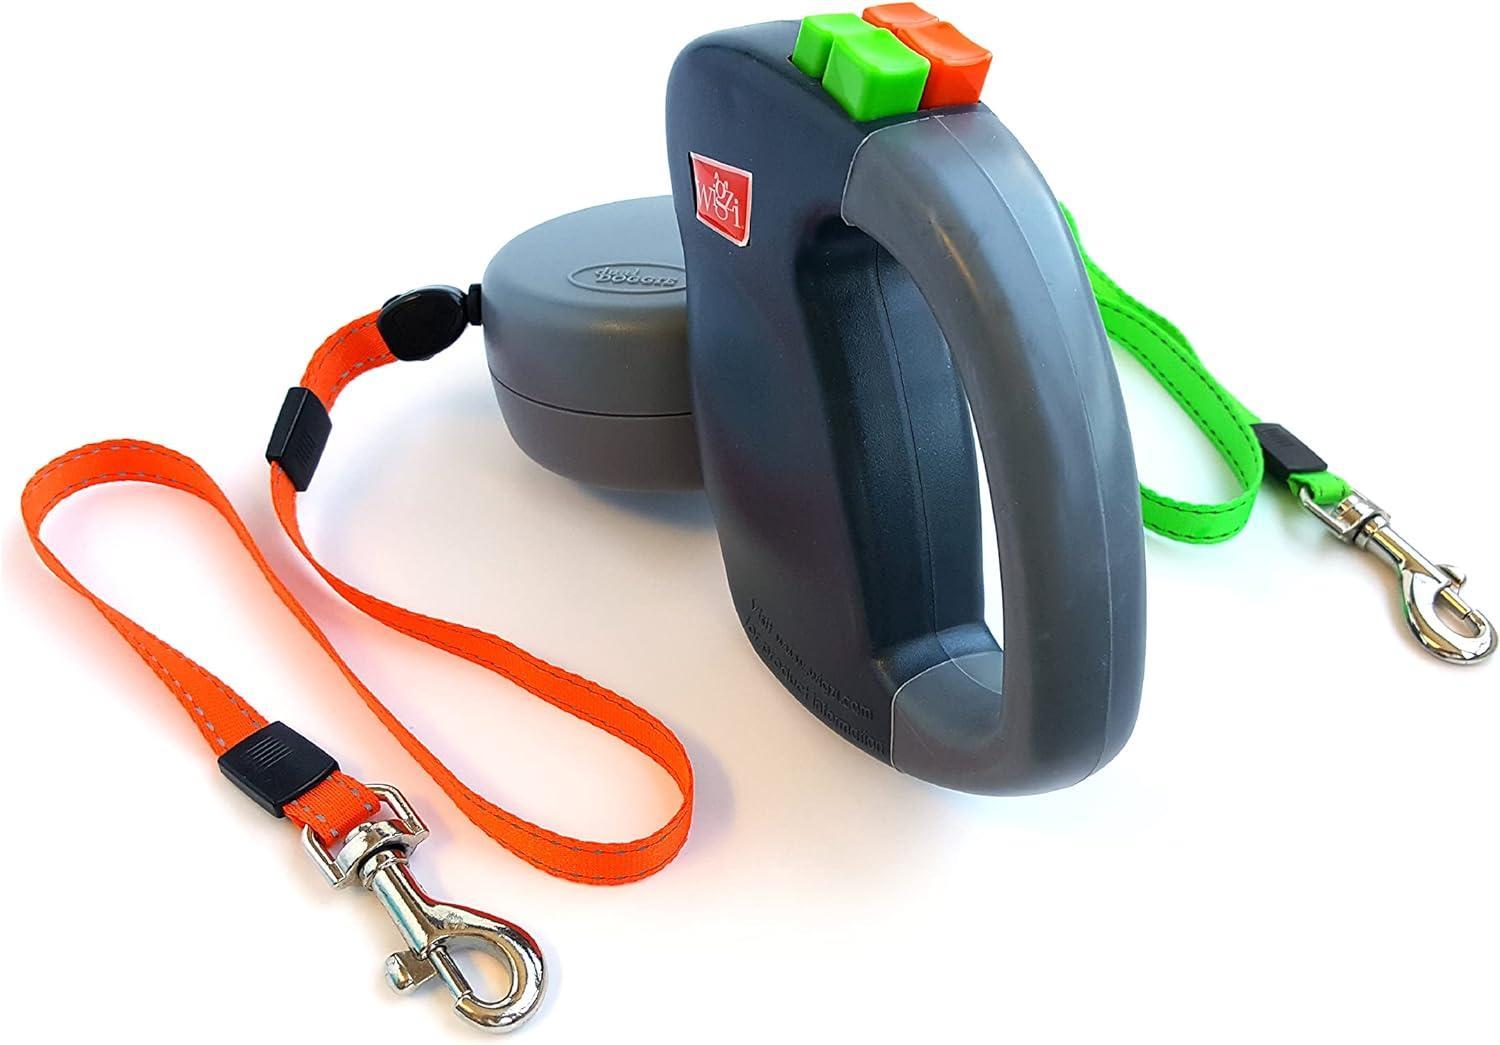 2 Two Dog Reflective Retractable Pet Leash - Two Dogs Each up to 50 lbs and 10ft. Reflective Orange and Green Leads. Dual Locking, Small, Gray